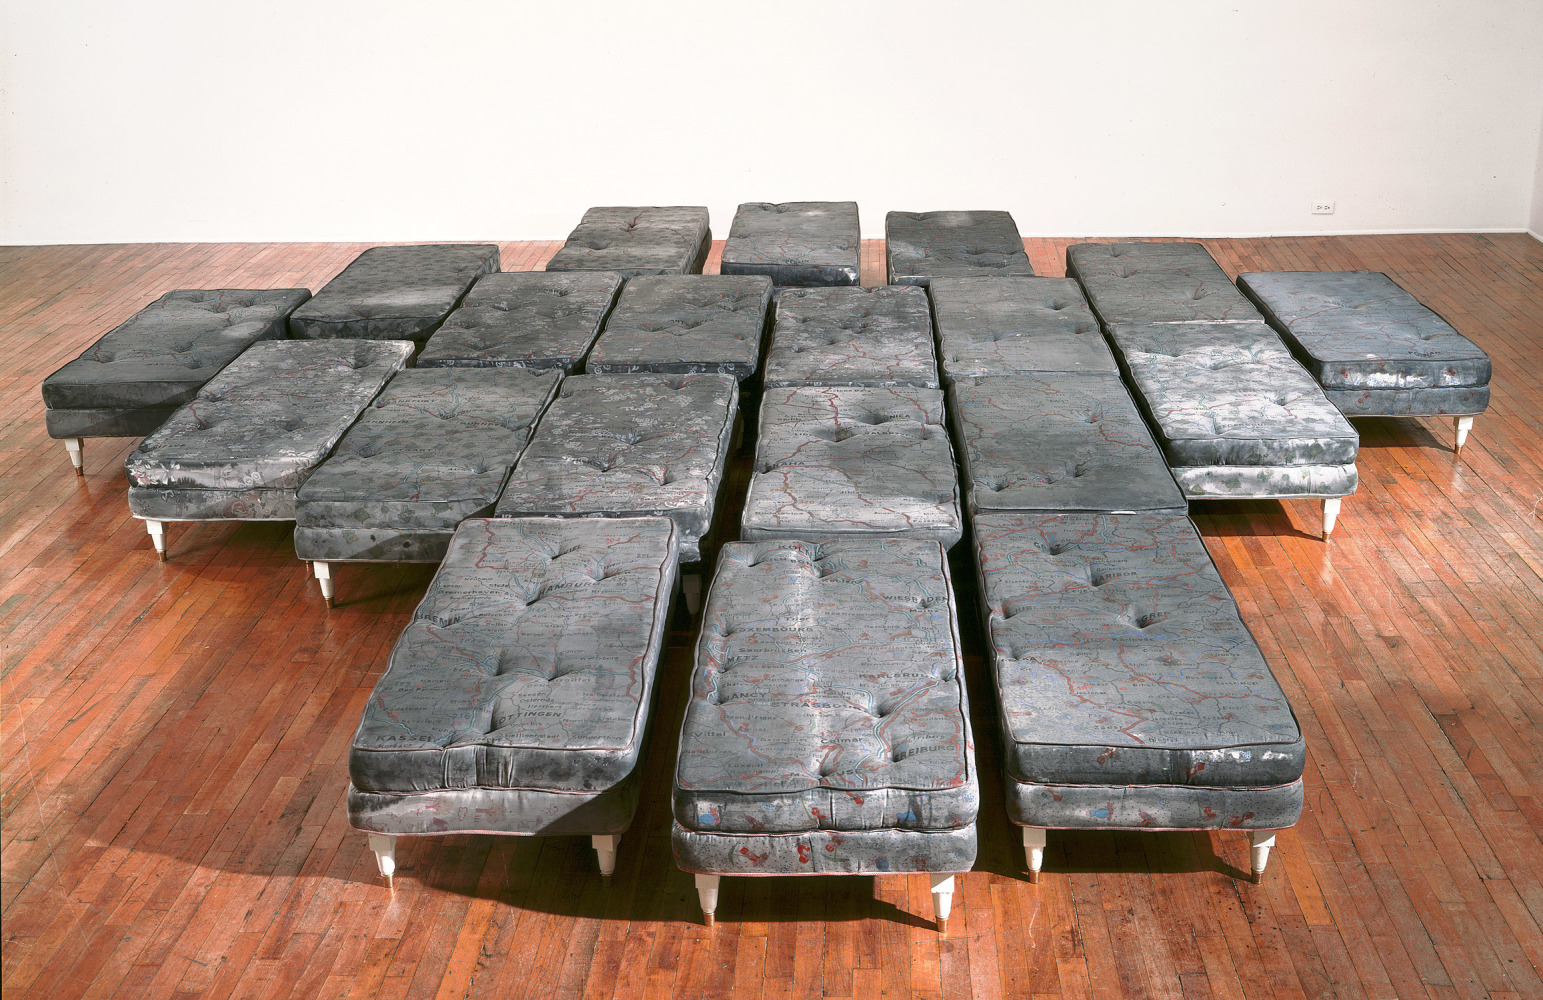 Guillermo Kuitca
Untitled, 1992
acrylic on mattress with wood and bronze legs
20 beds; 15 3/4 x 23 5/8 x 47 1/4 inches&amp;nbsp;(40 x 60 x 120 cm) each
SW 94257 (1-20)
Collection of Tate, London